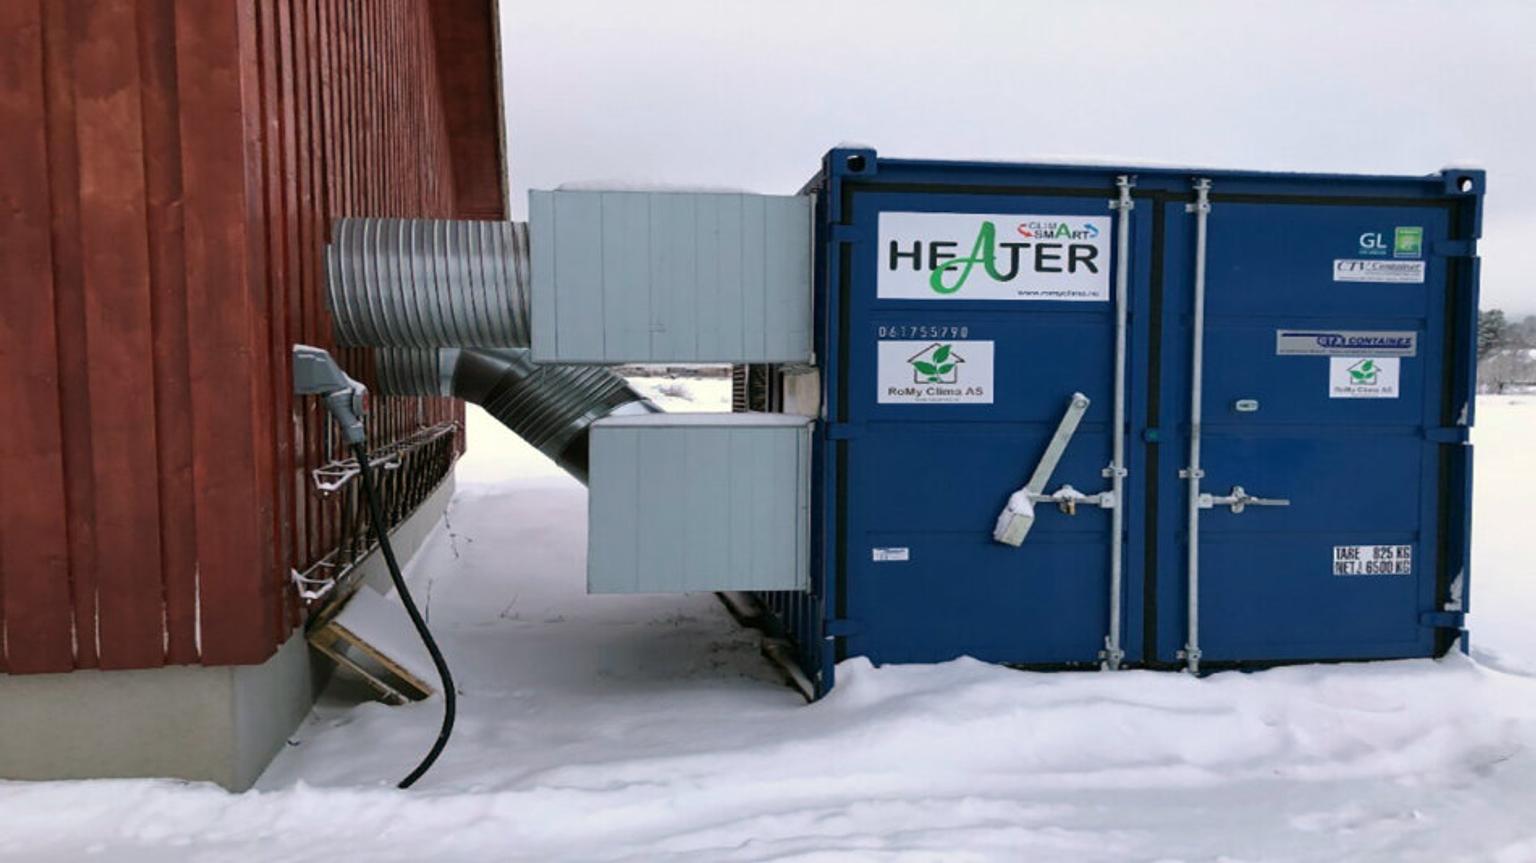 Industrial heater in a blue metal container